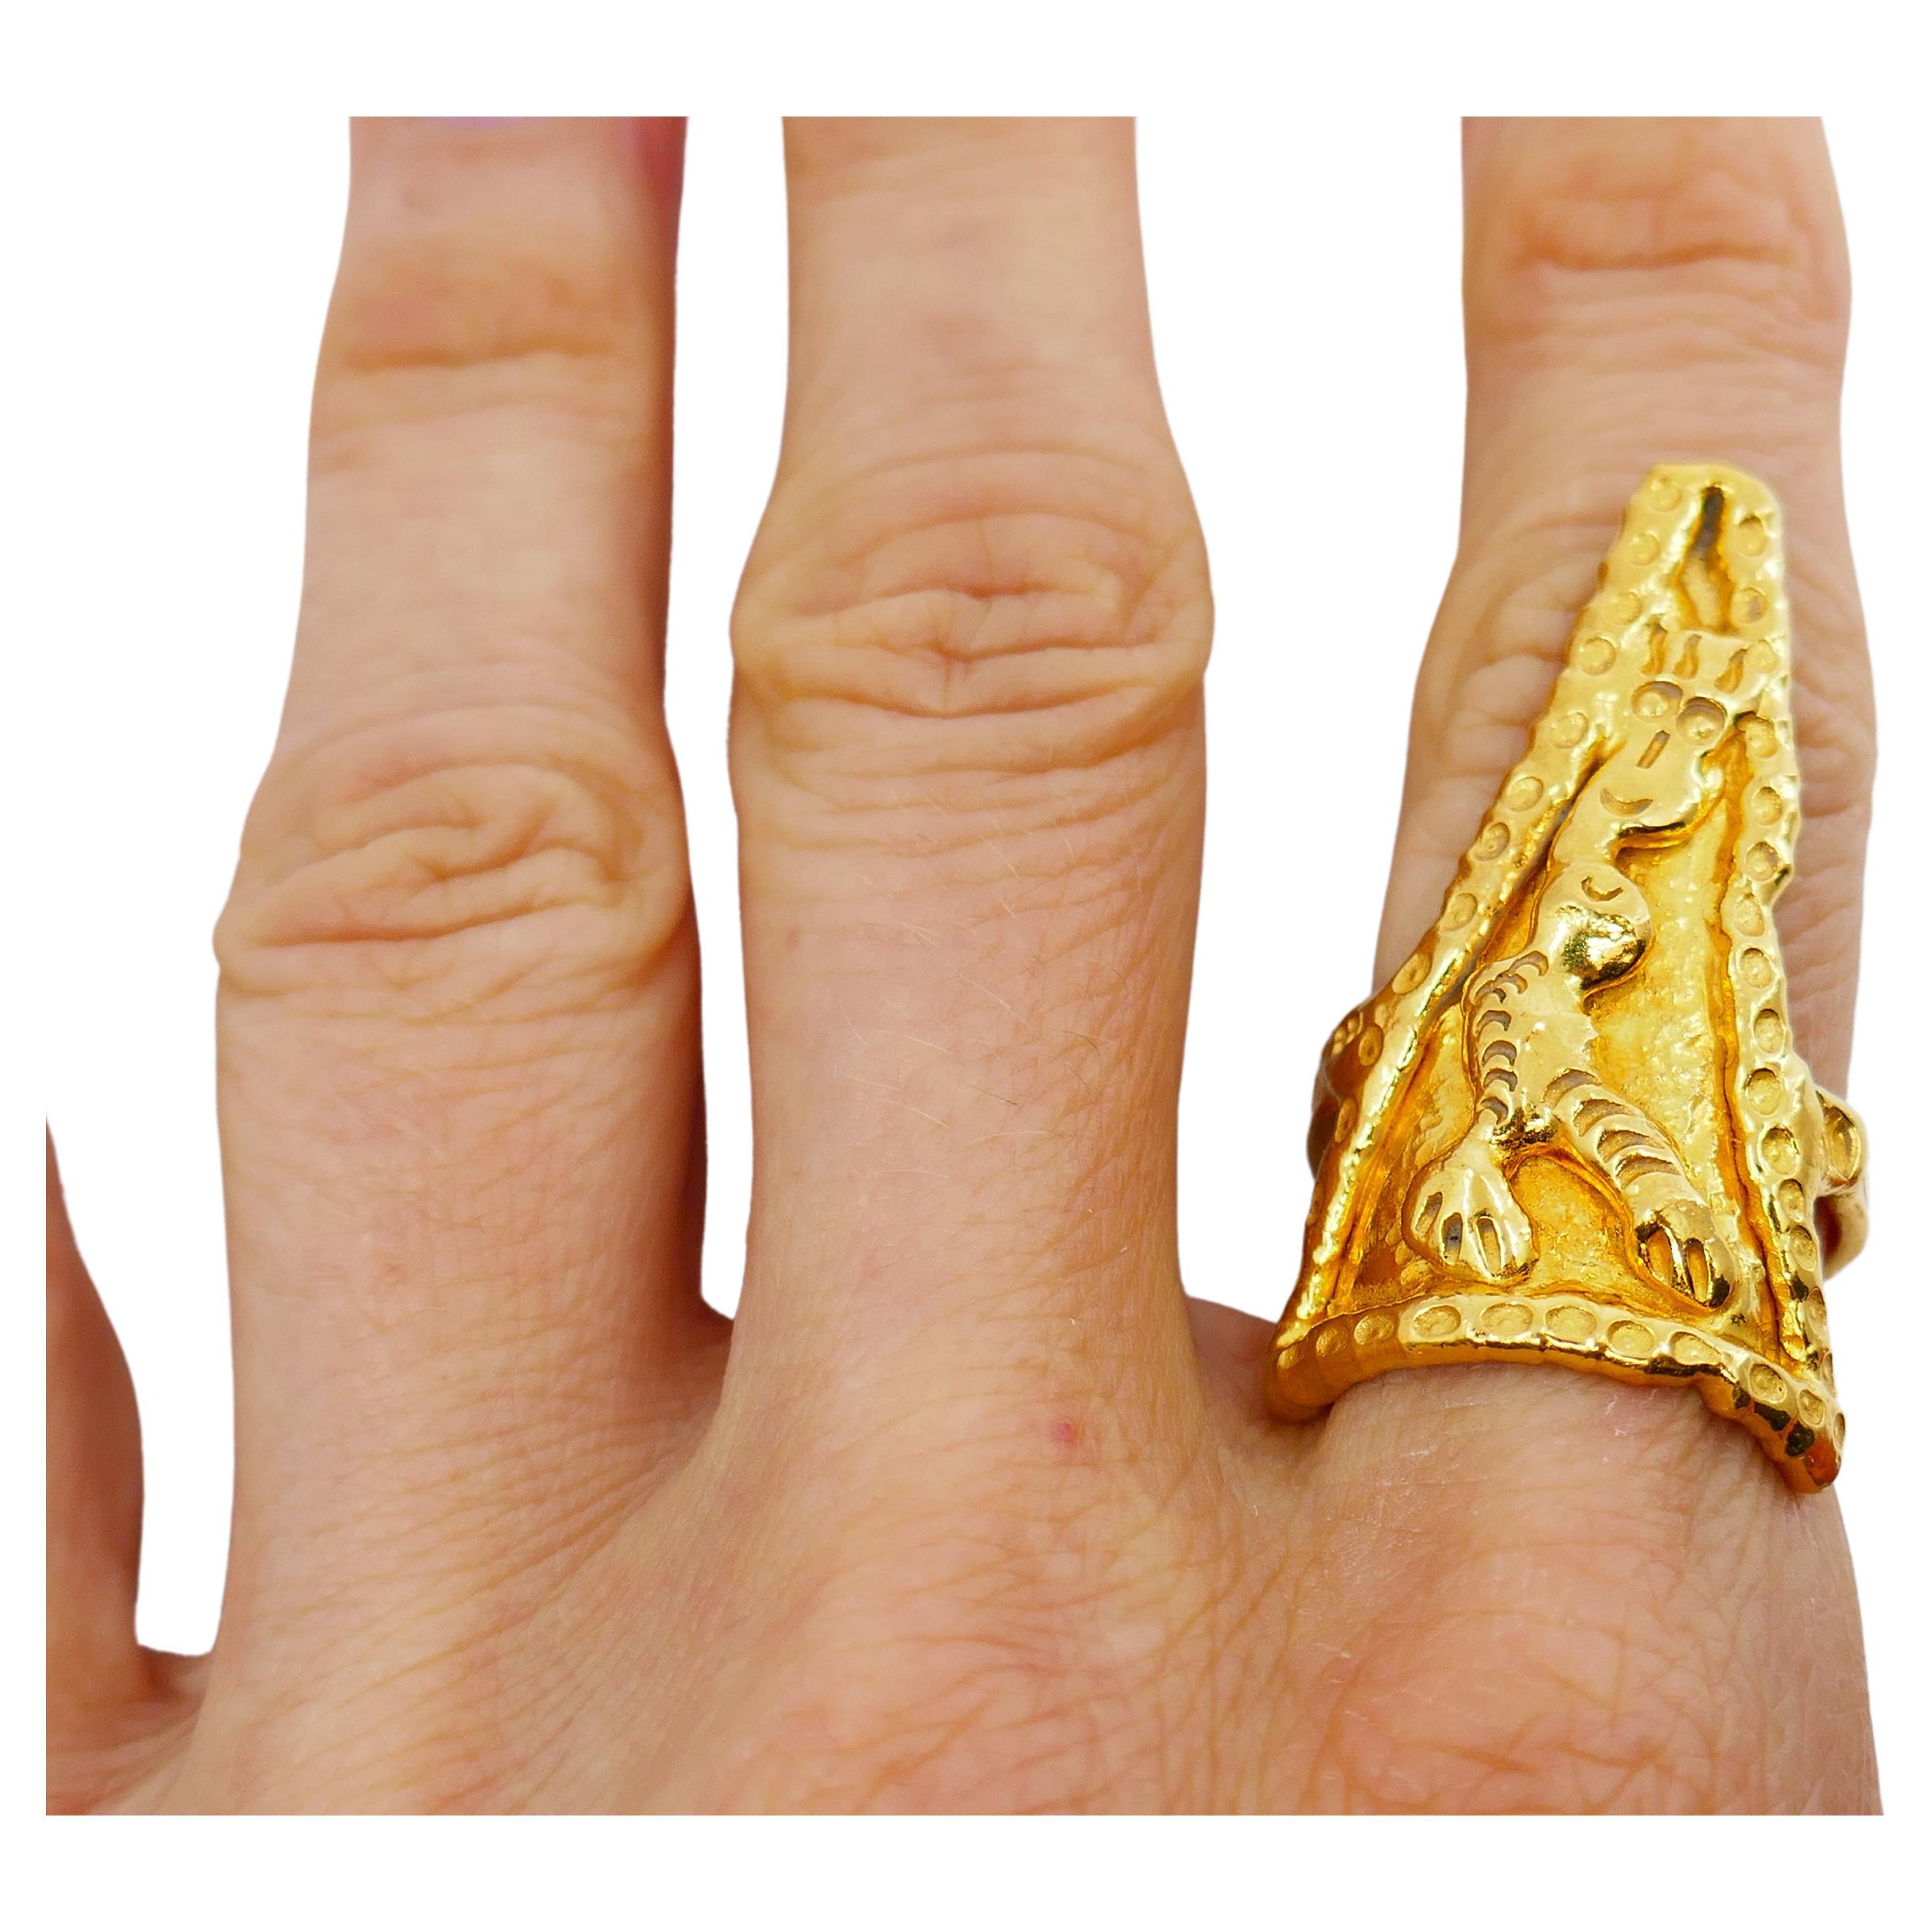 A unique Jean Mahie triangular ring made of 22k gold.
The ring has an abstract design resembles a figure with a smiling face. The figure is framed by a dotted gold frame. The shank is also dotted with little circles. All these details along with the